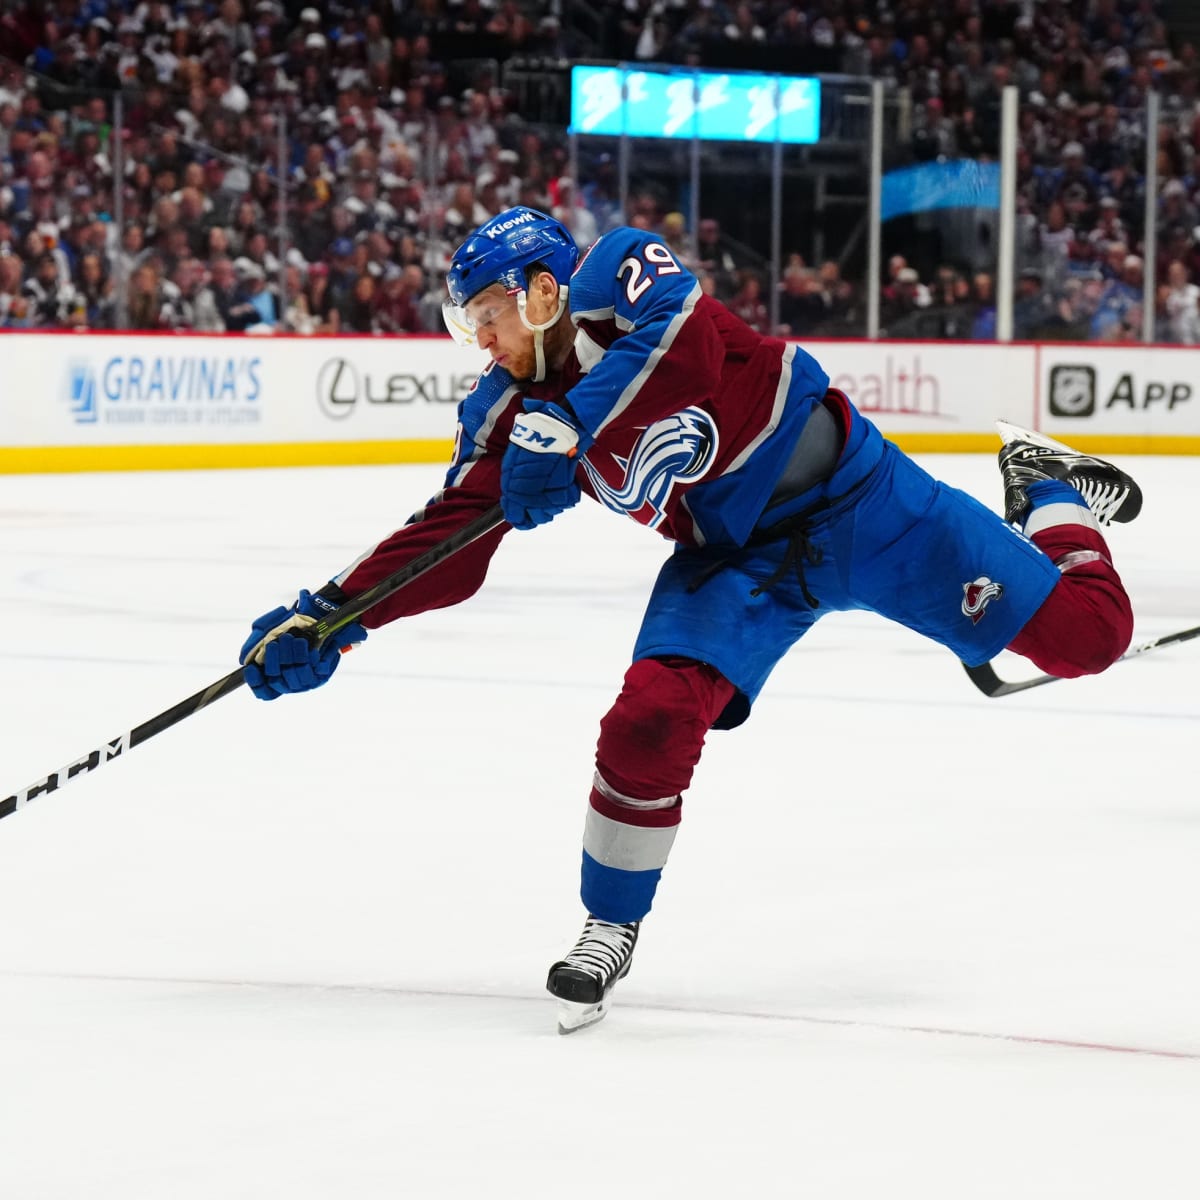 Nova Scotia's Nathan MacKinnon becomes highest-paid player in the NHL